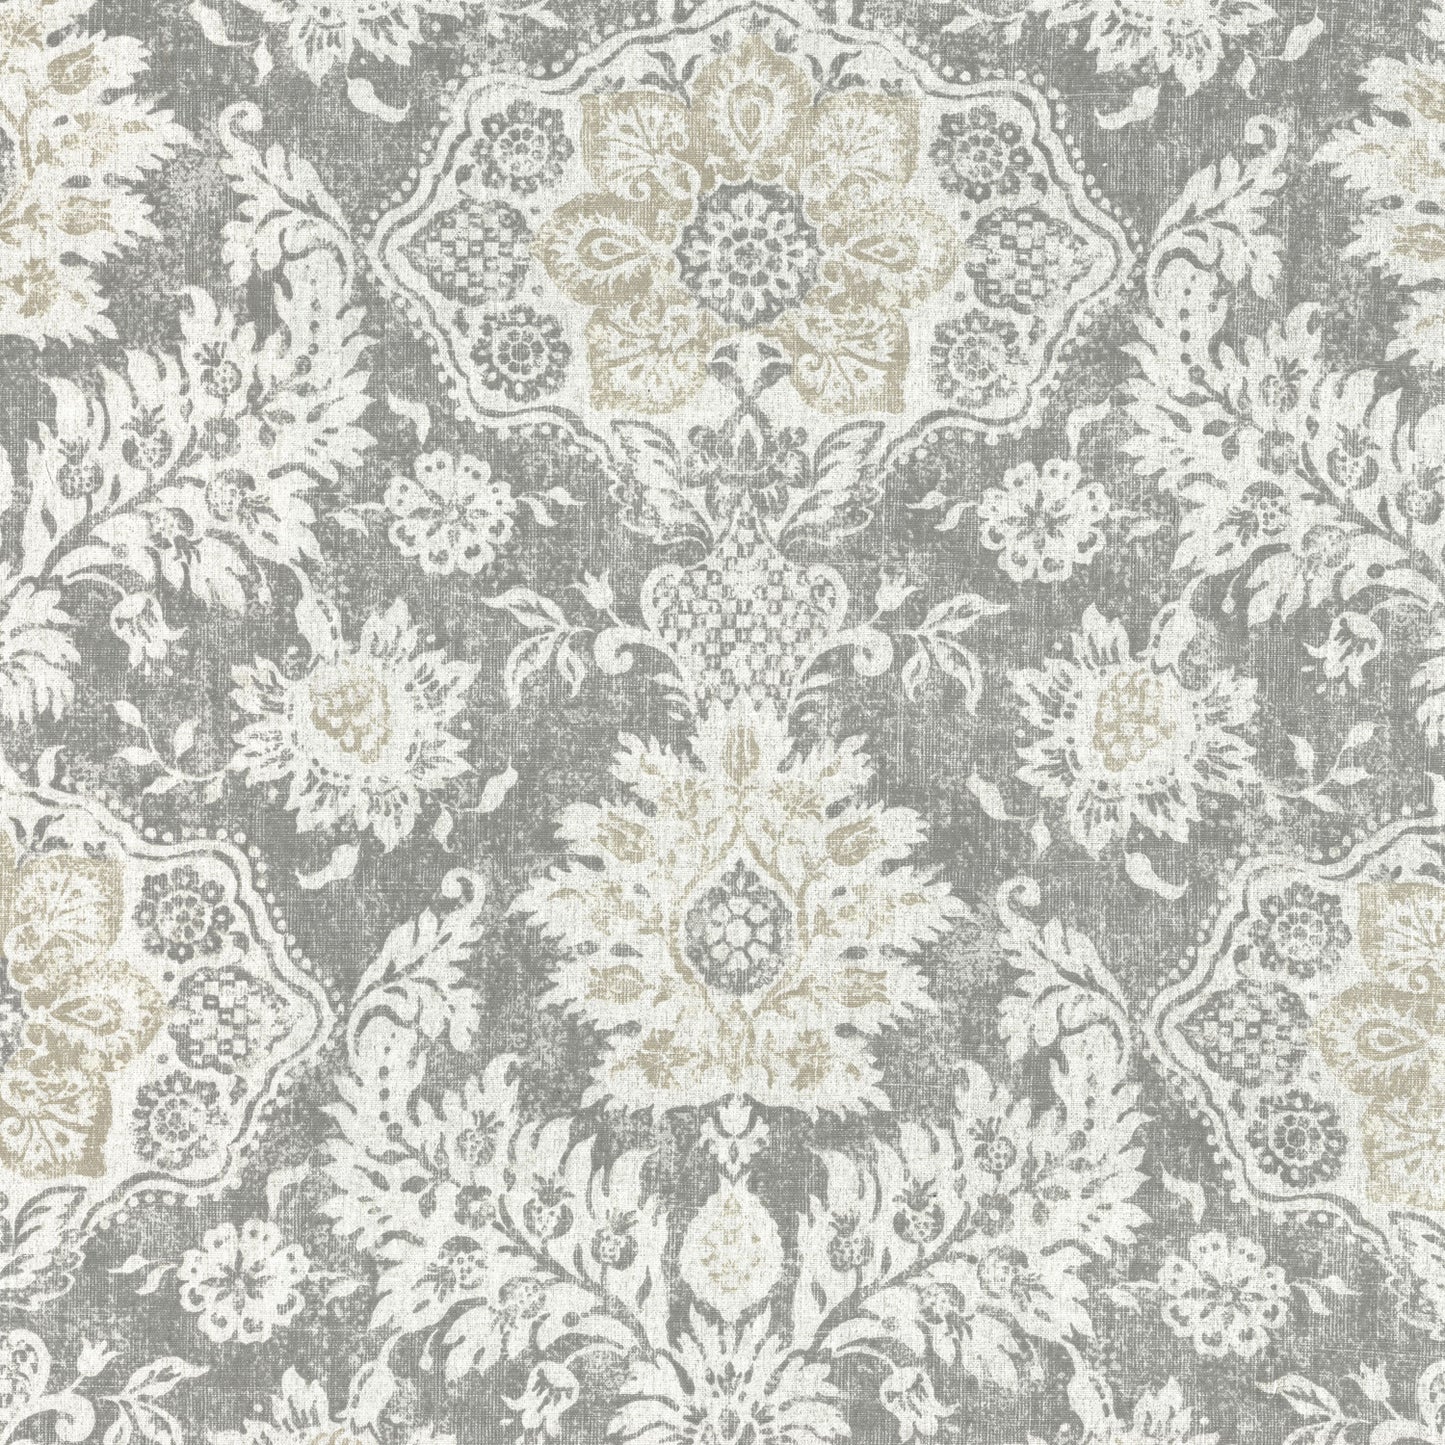 pinch pleated curtains in belmont mist pale gray floral damask